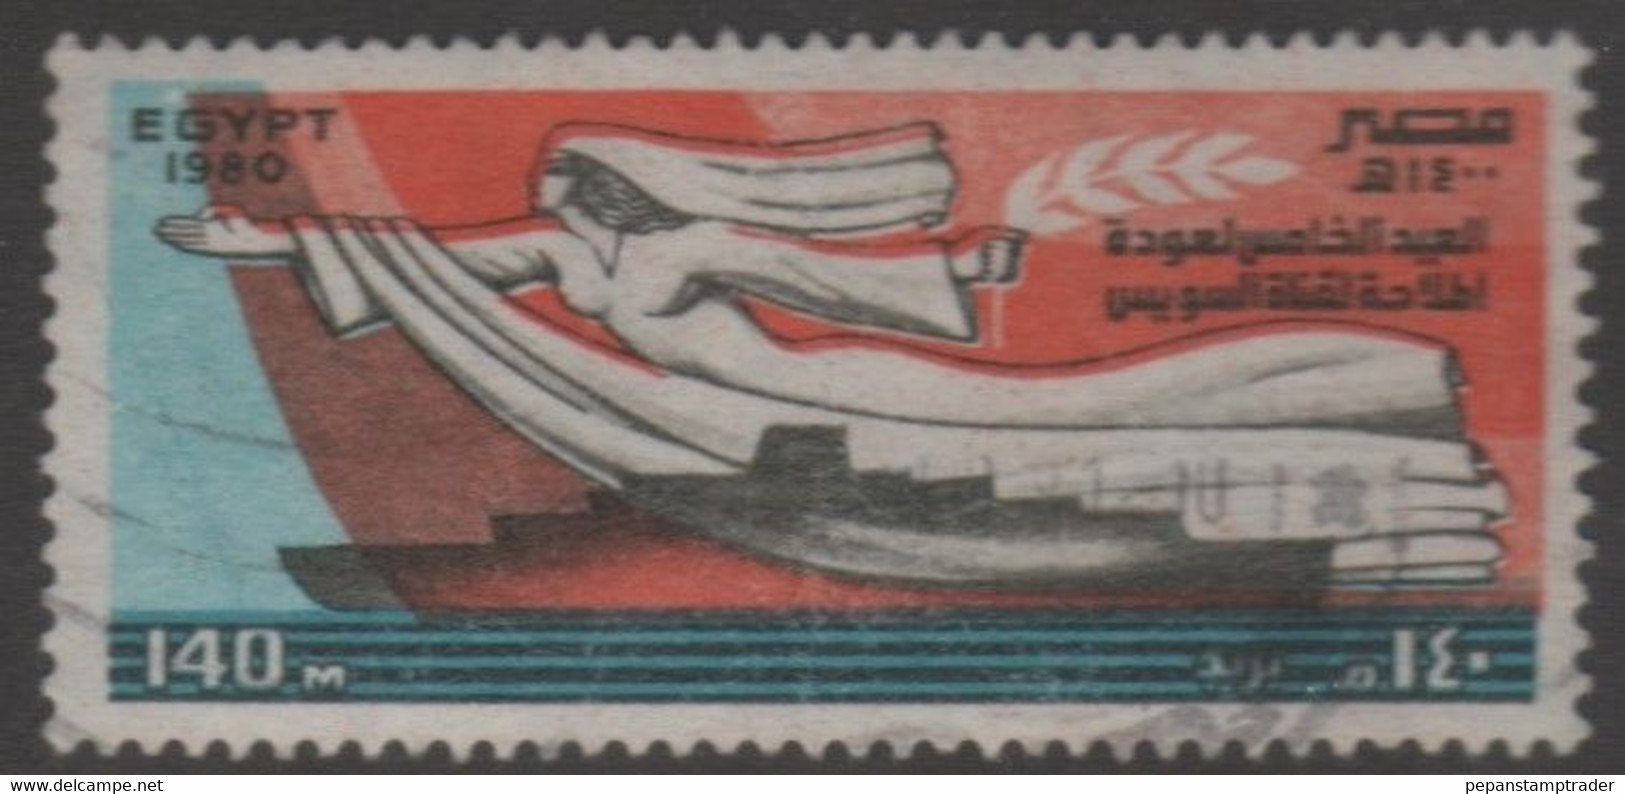 Egypt - #1135 - Used - Used Stamps